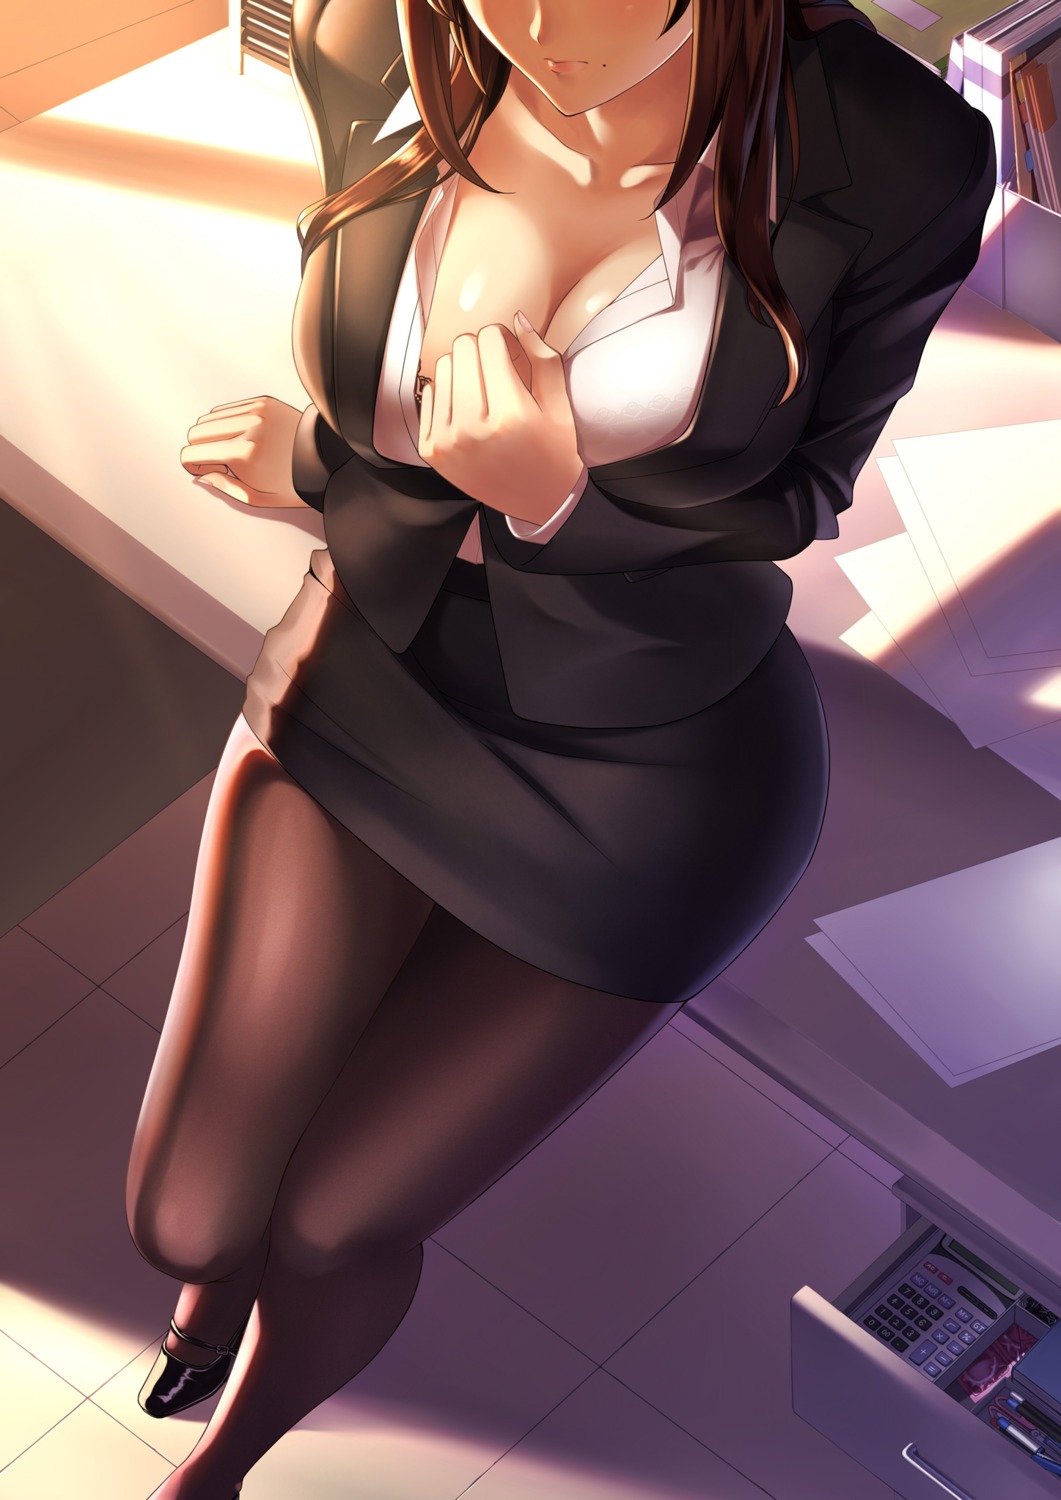 bra business_suit cleavage open_shirt pantyhose toumin